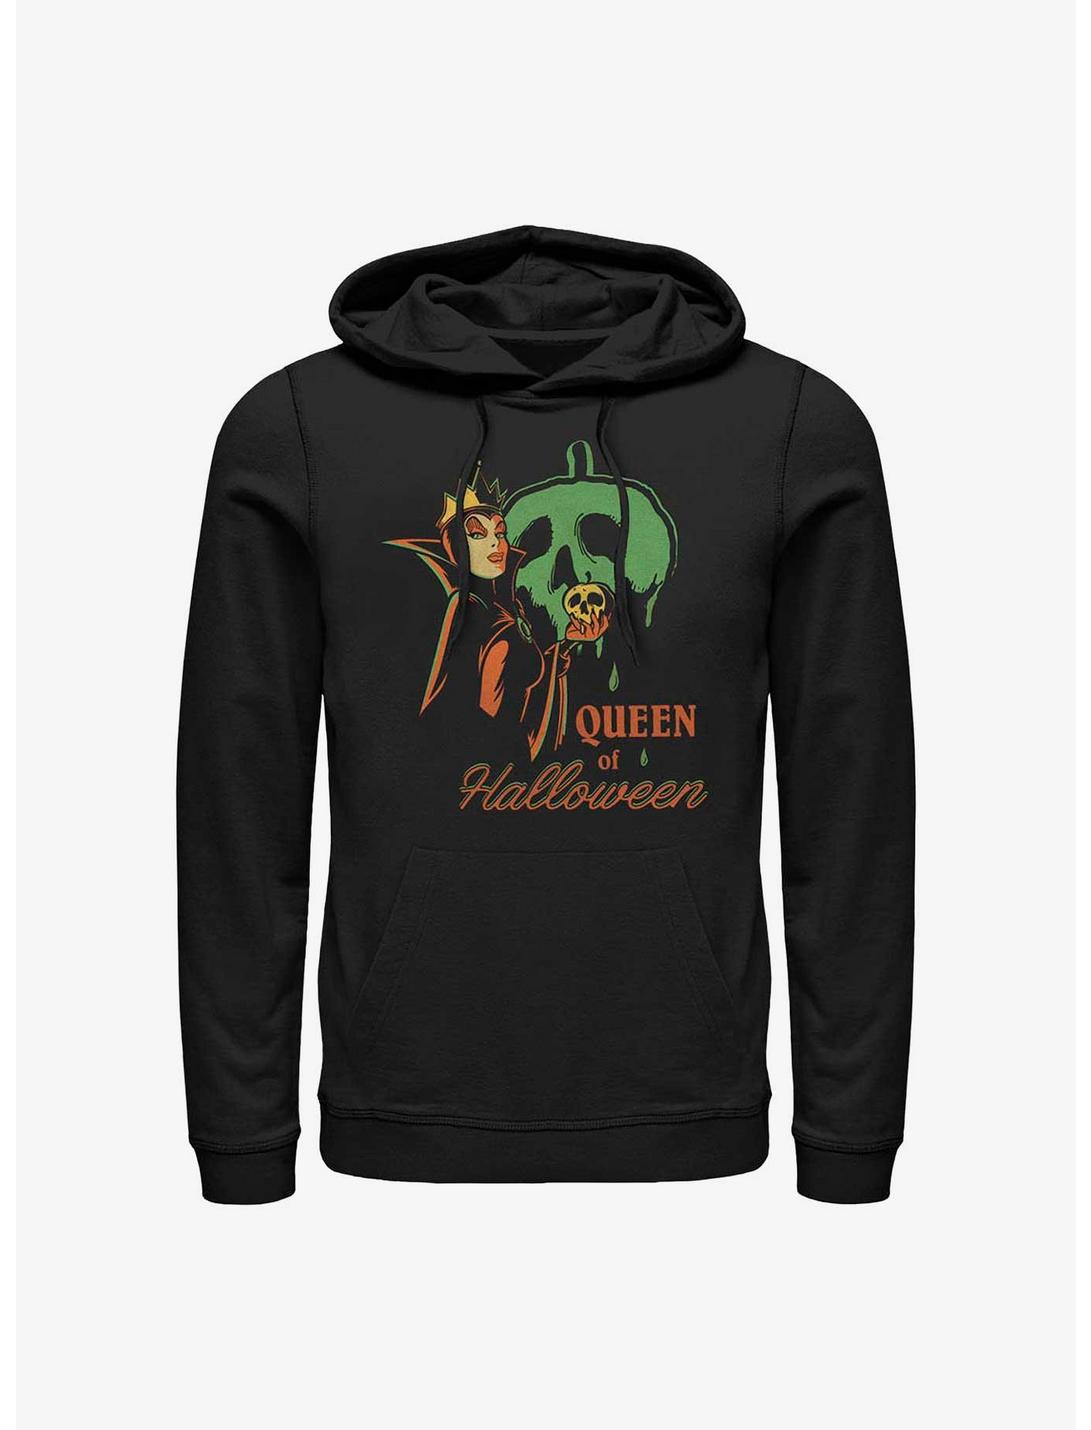 Disney Snow White And The Seven Dwarfs Evil Queen of Halloween Hoodie, BLACK, hi-res